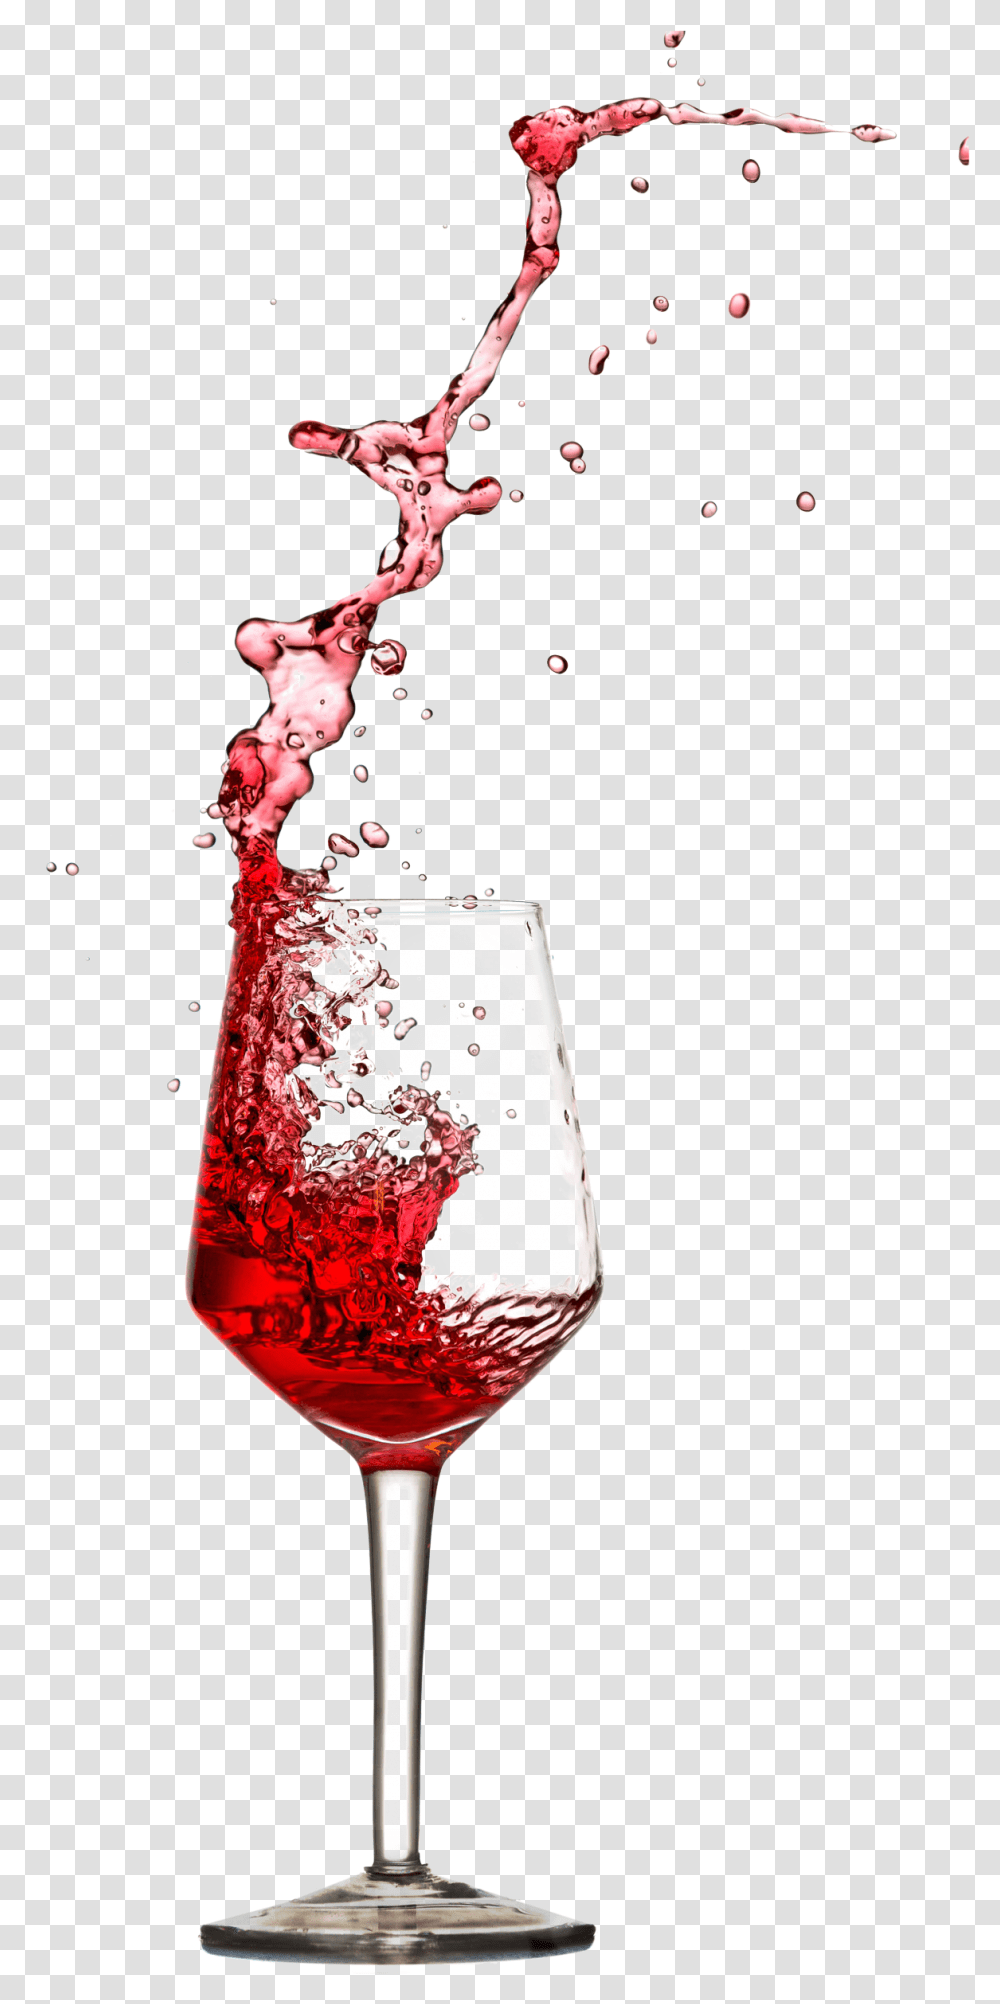 Alcohol Alcoholic Beverage Celebration Cold Drink Background Glass Of Wine, Red Wine, Lamp, Wine Glass Transparent Png